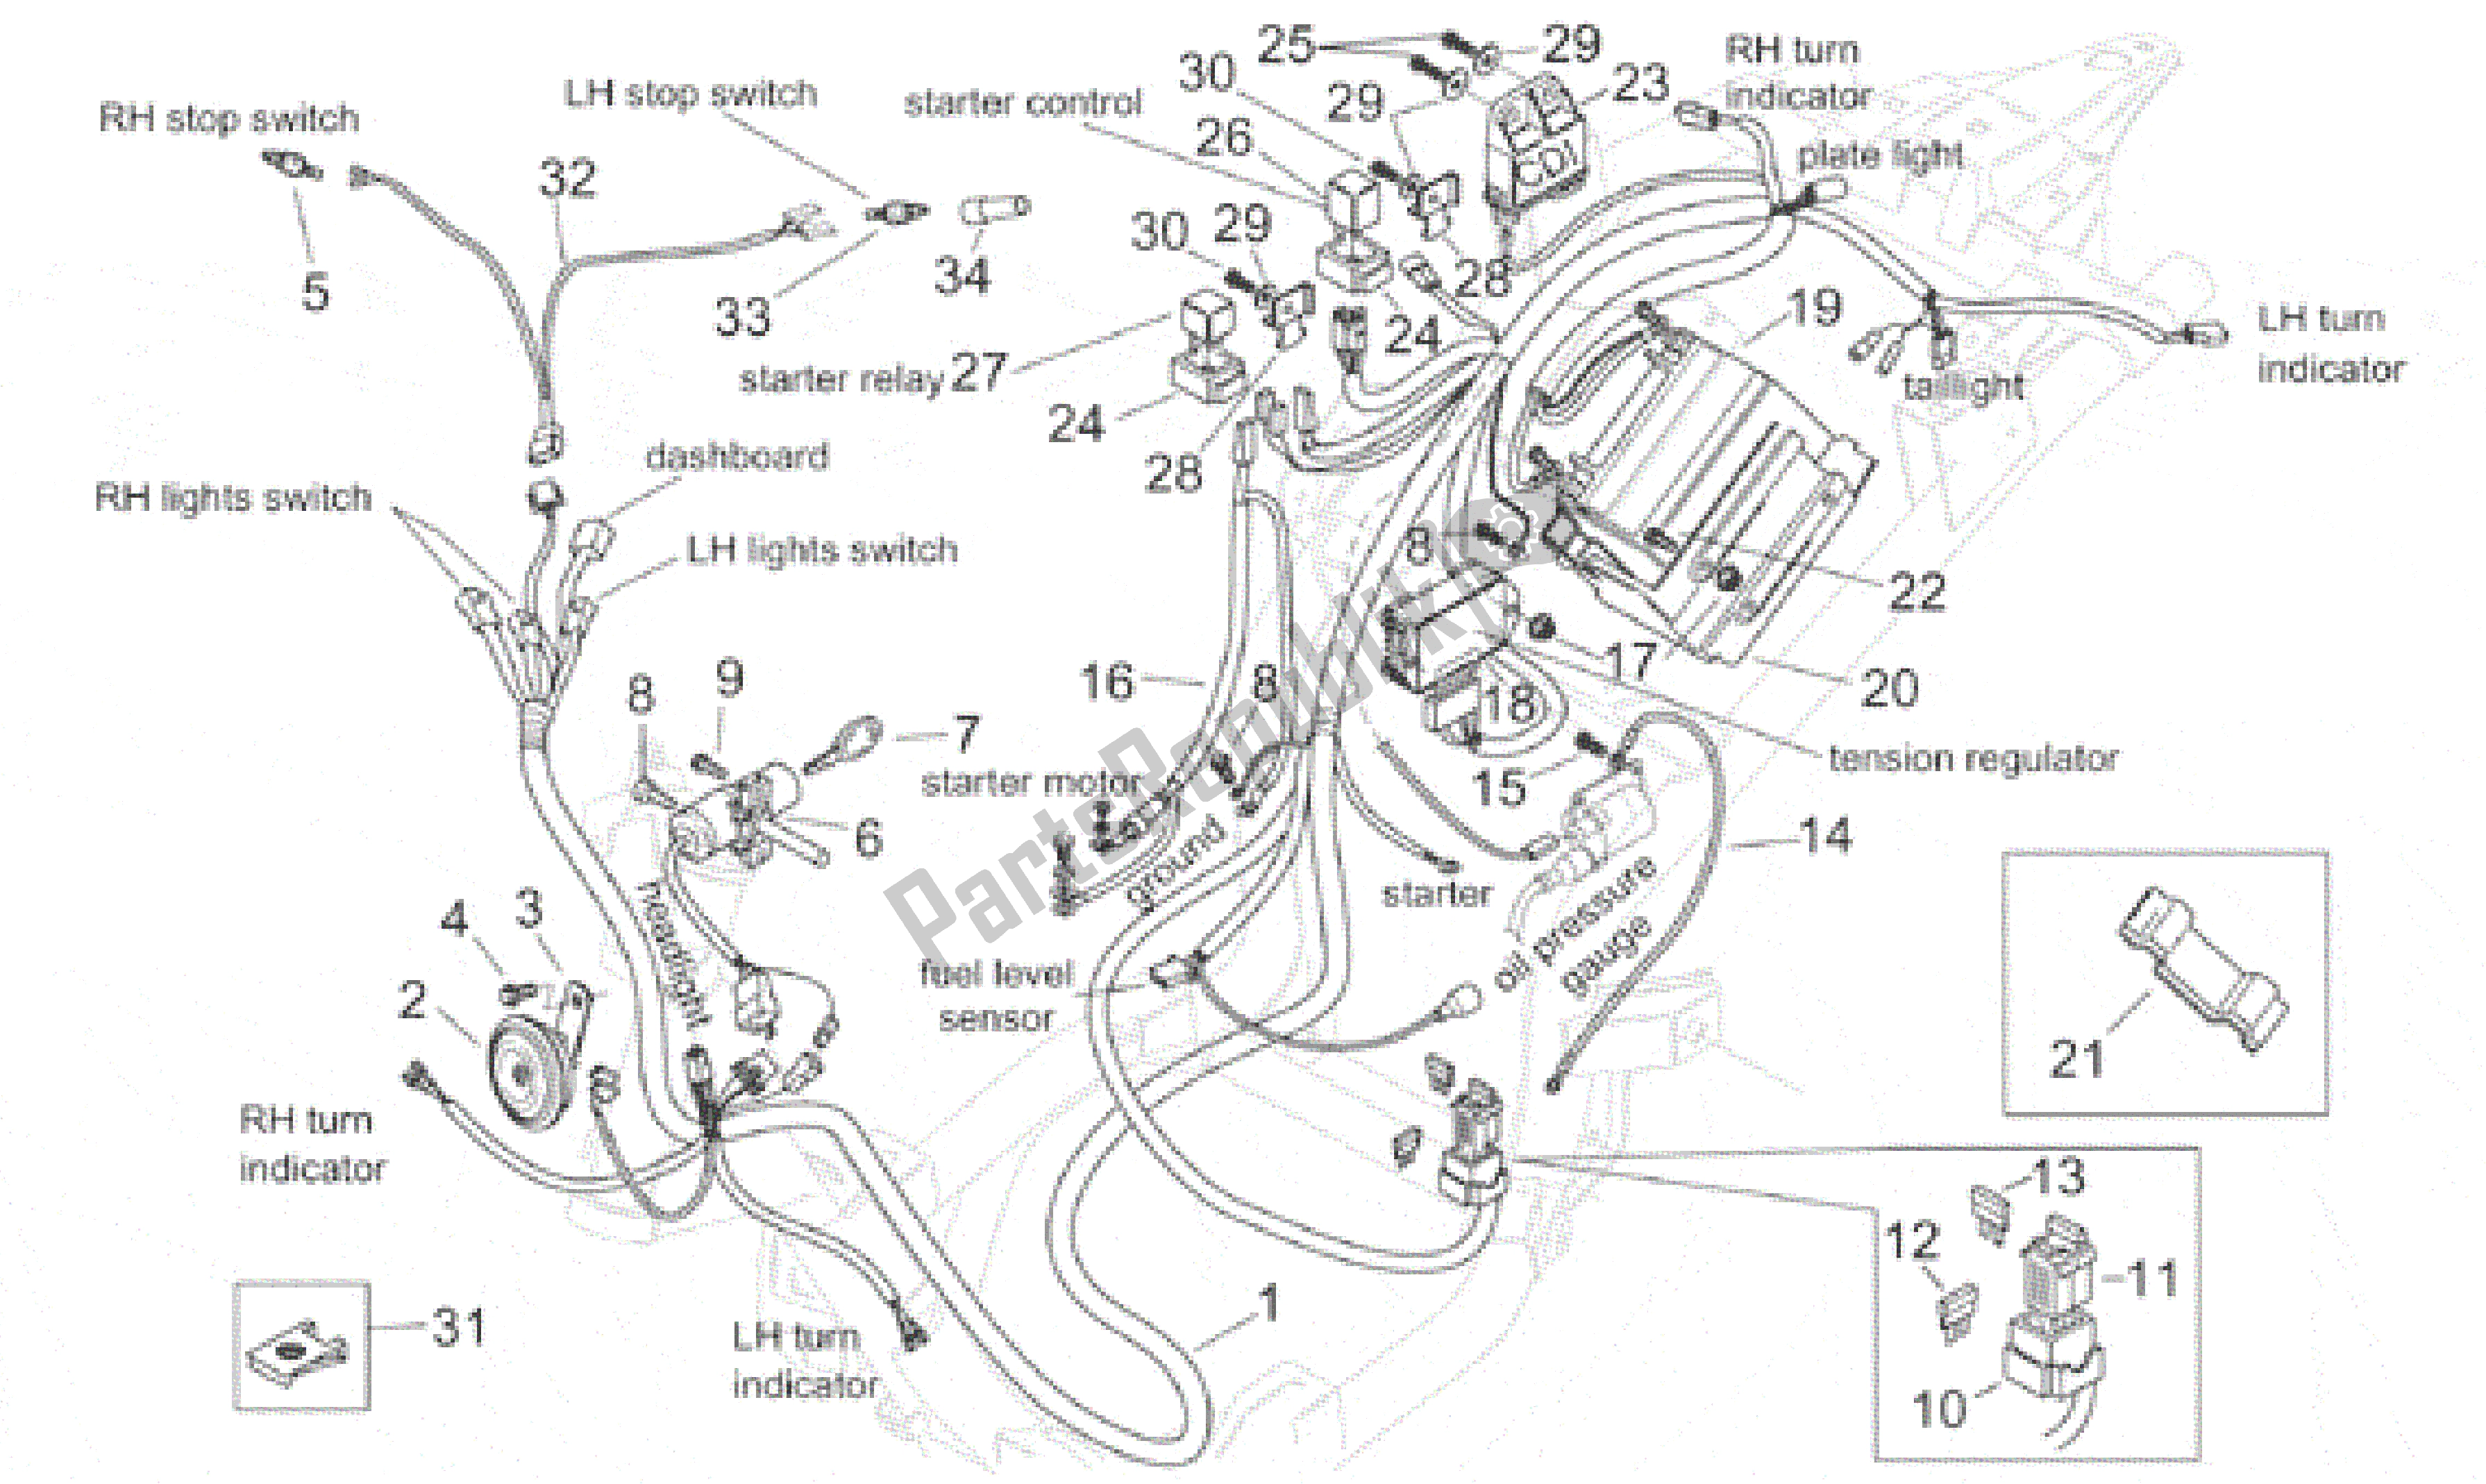 All parts for the Electrical System - Custom of the Aprilia Habana 125 1999 - 2001